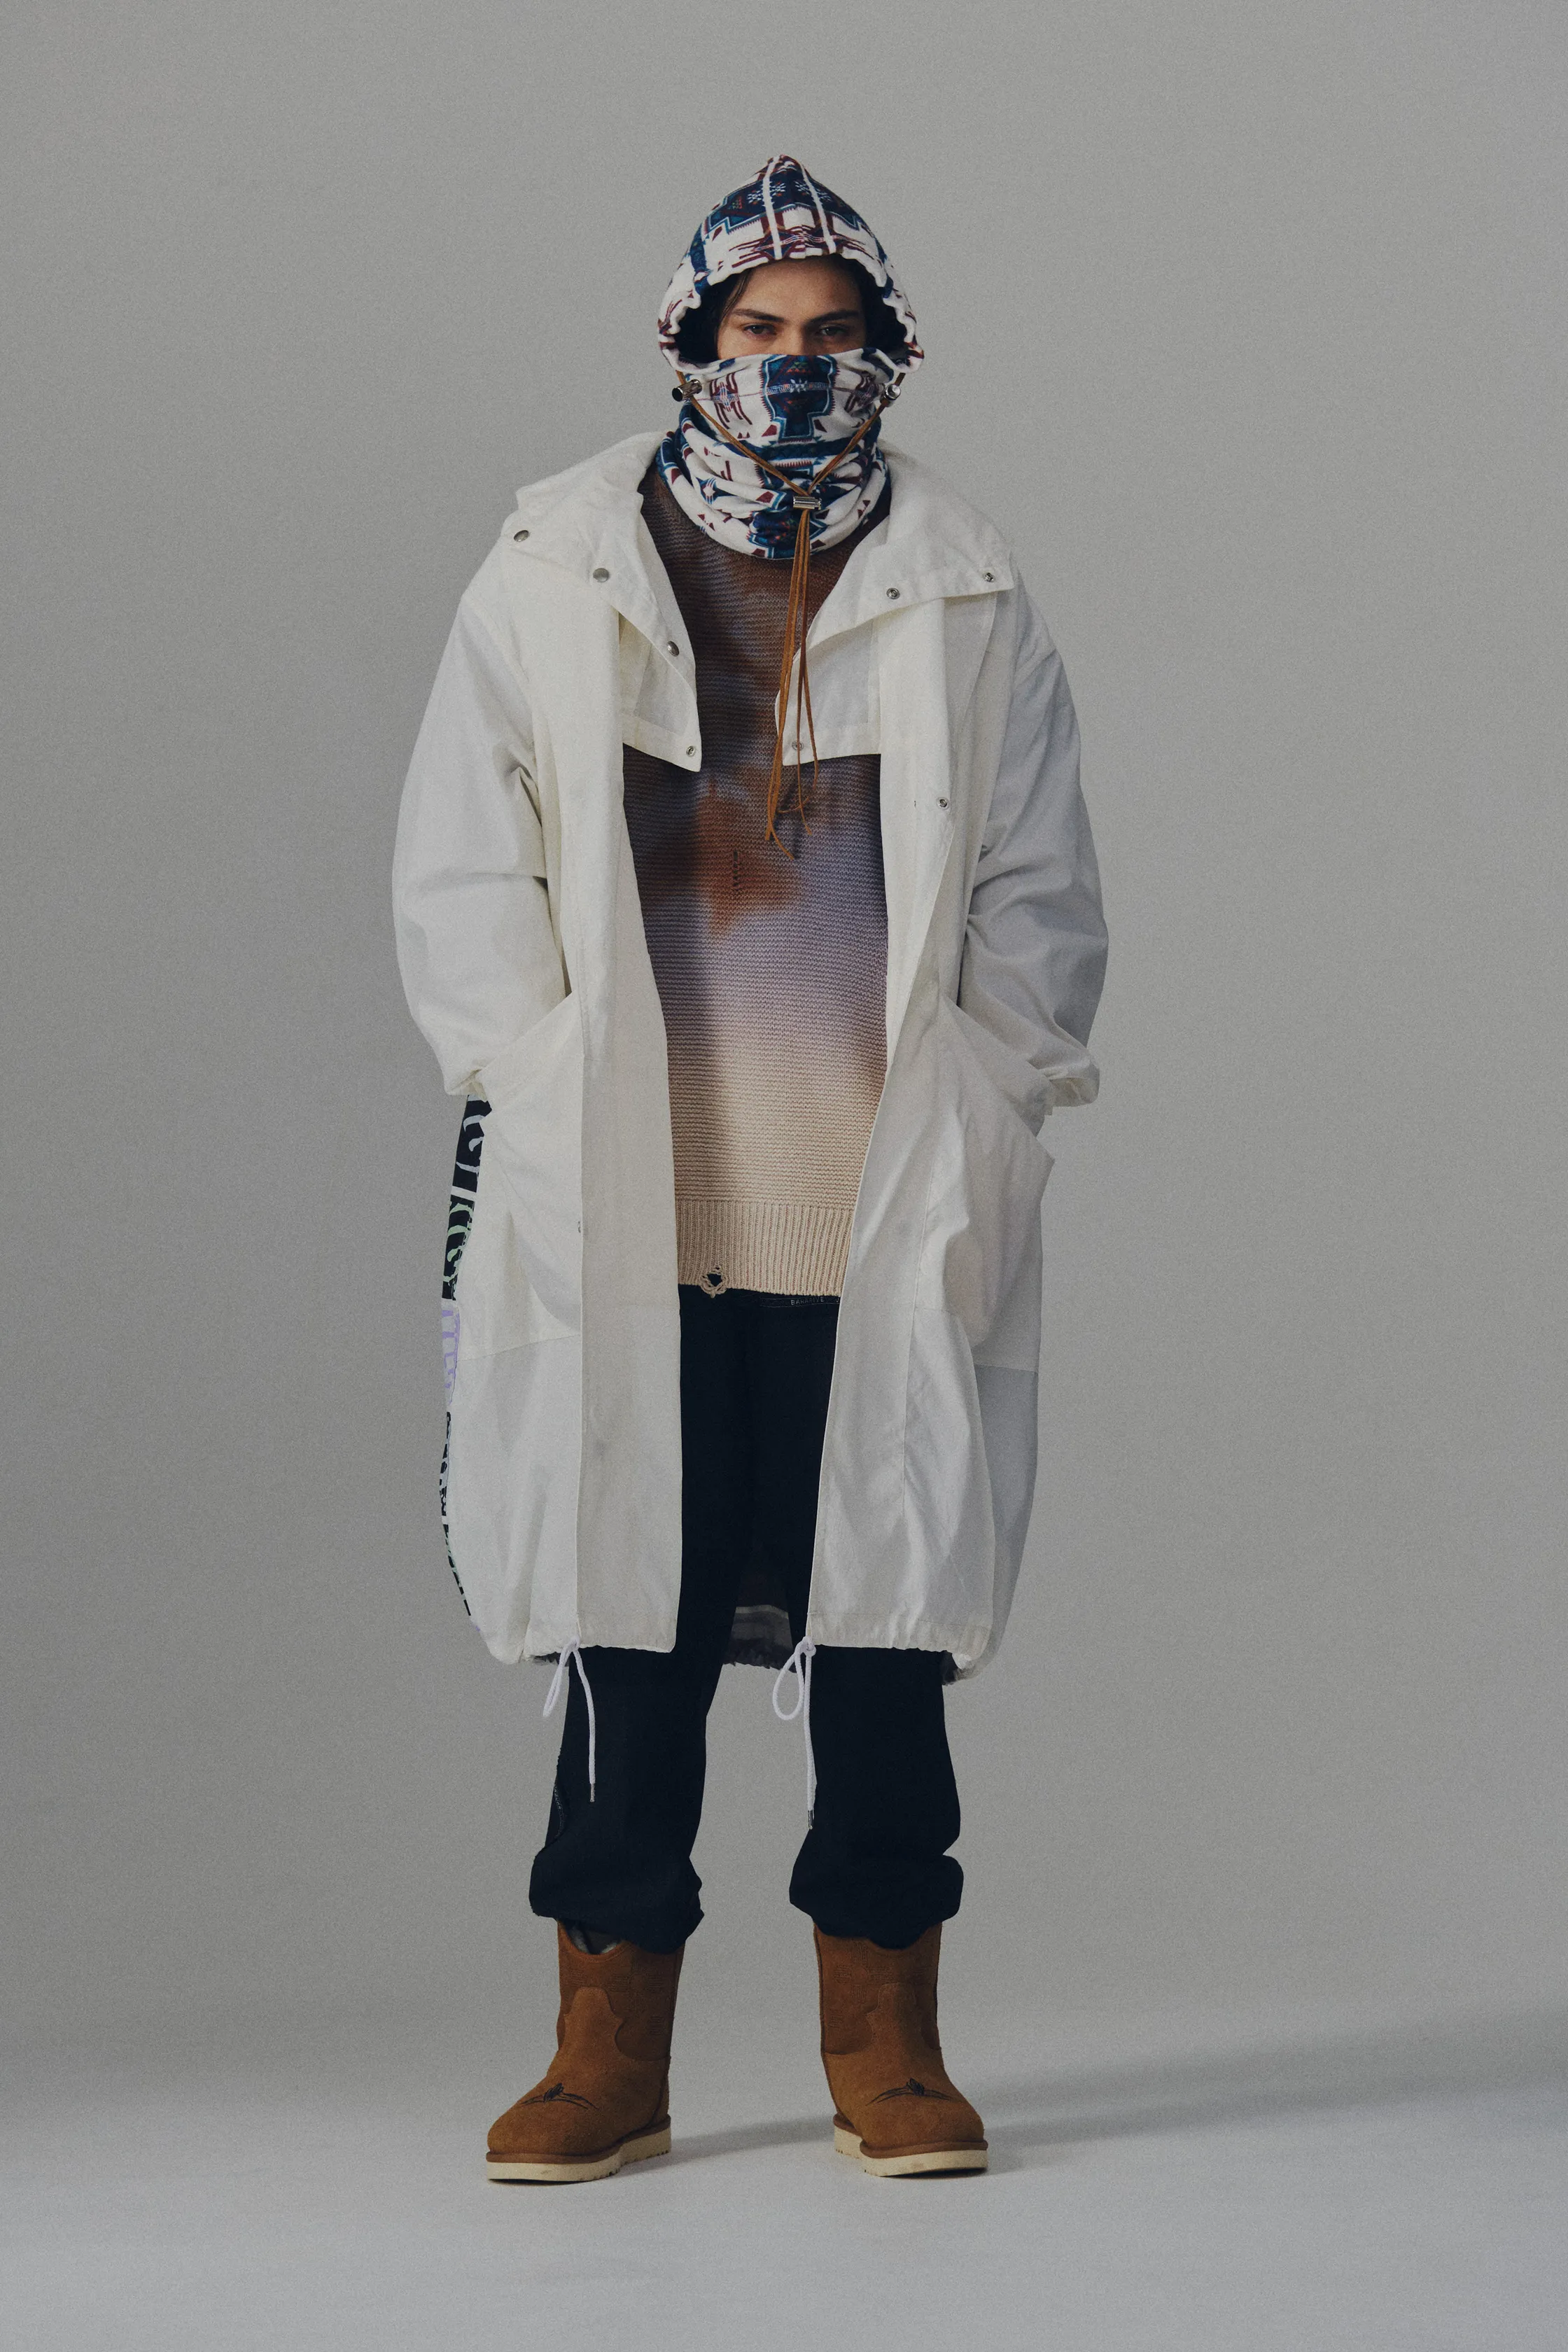 00004-Children-of-the-Discordance-Mens-Fall-22-credit-brand.png